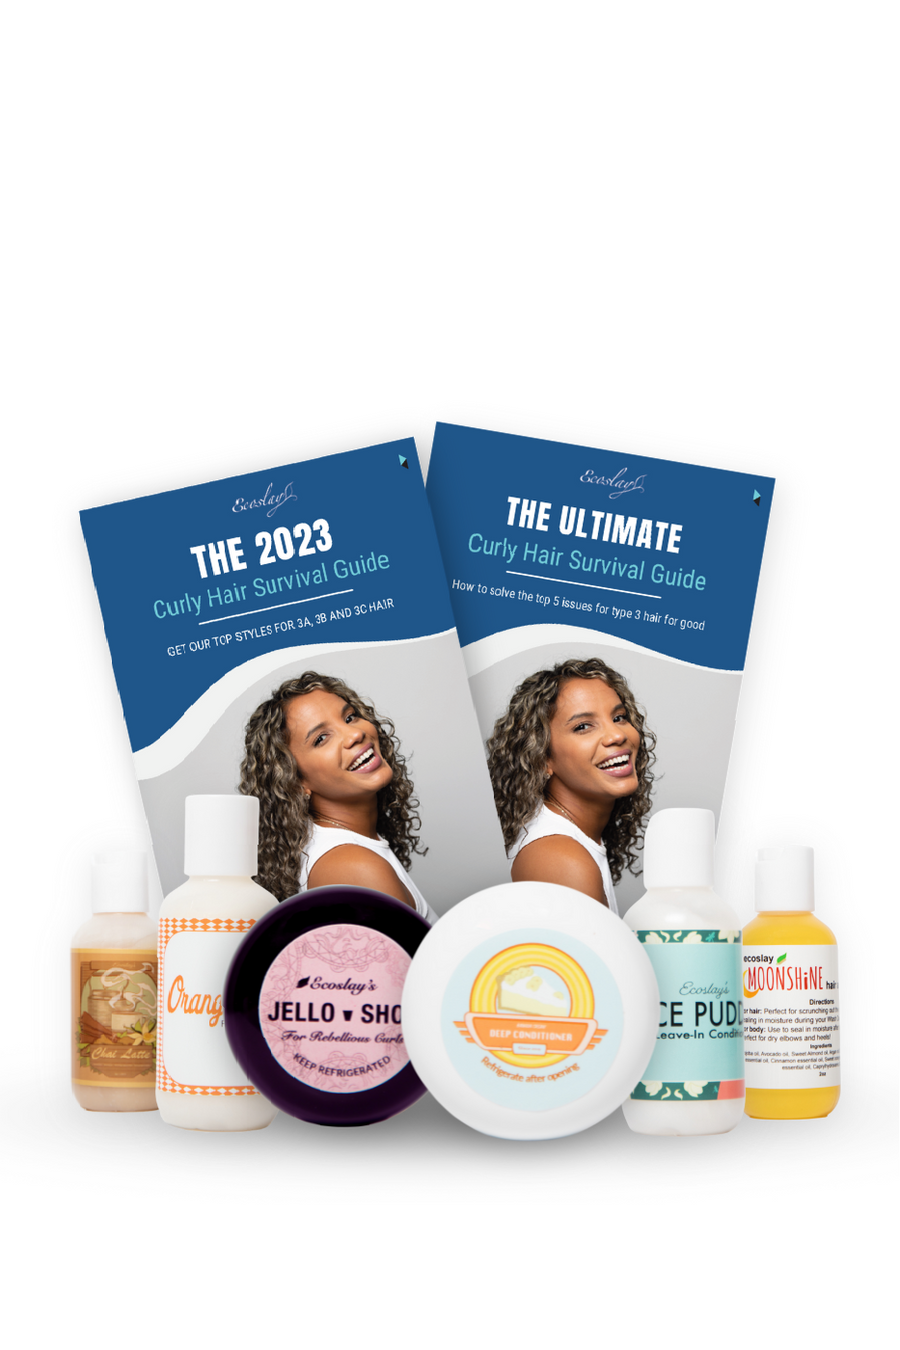 Haircare product samples